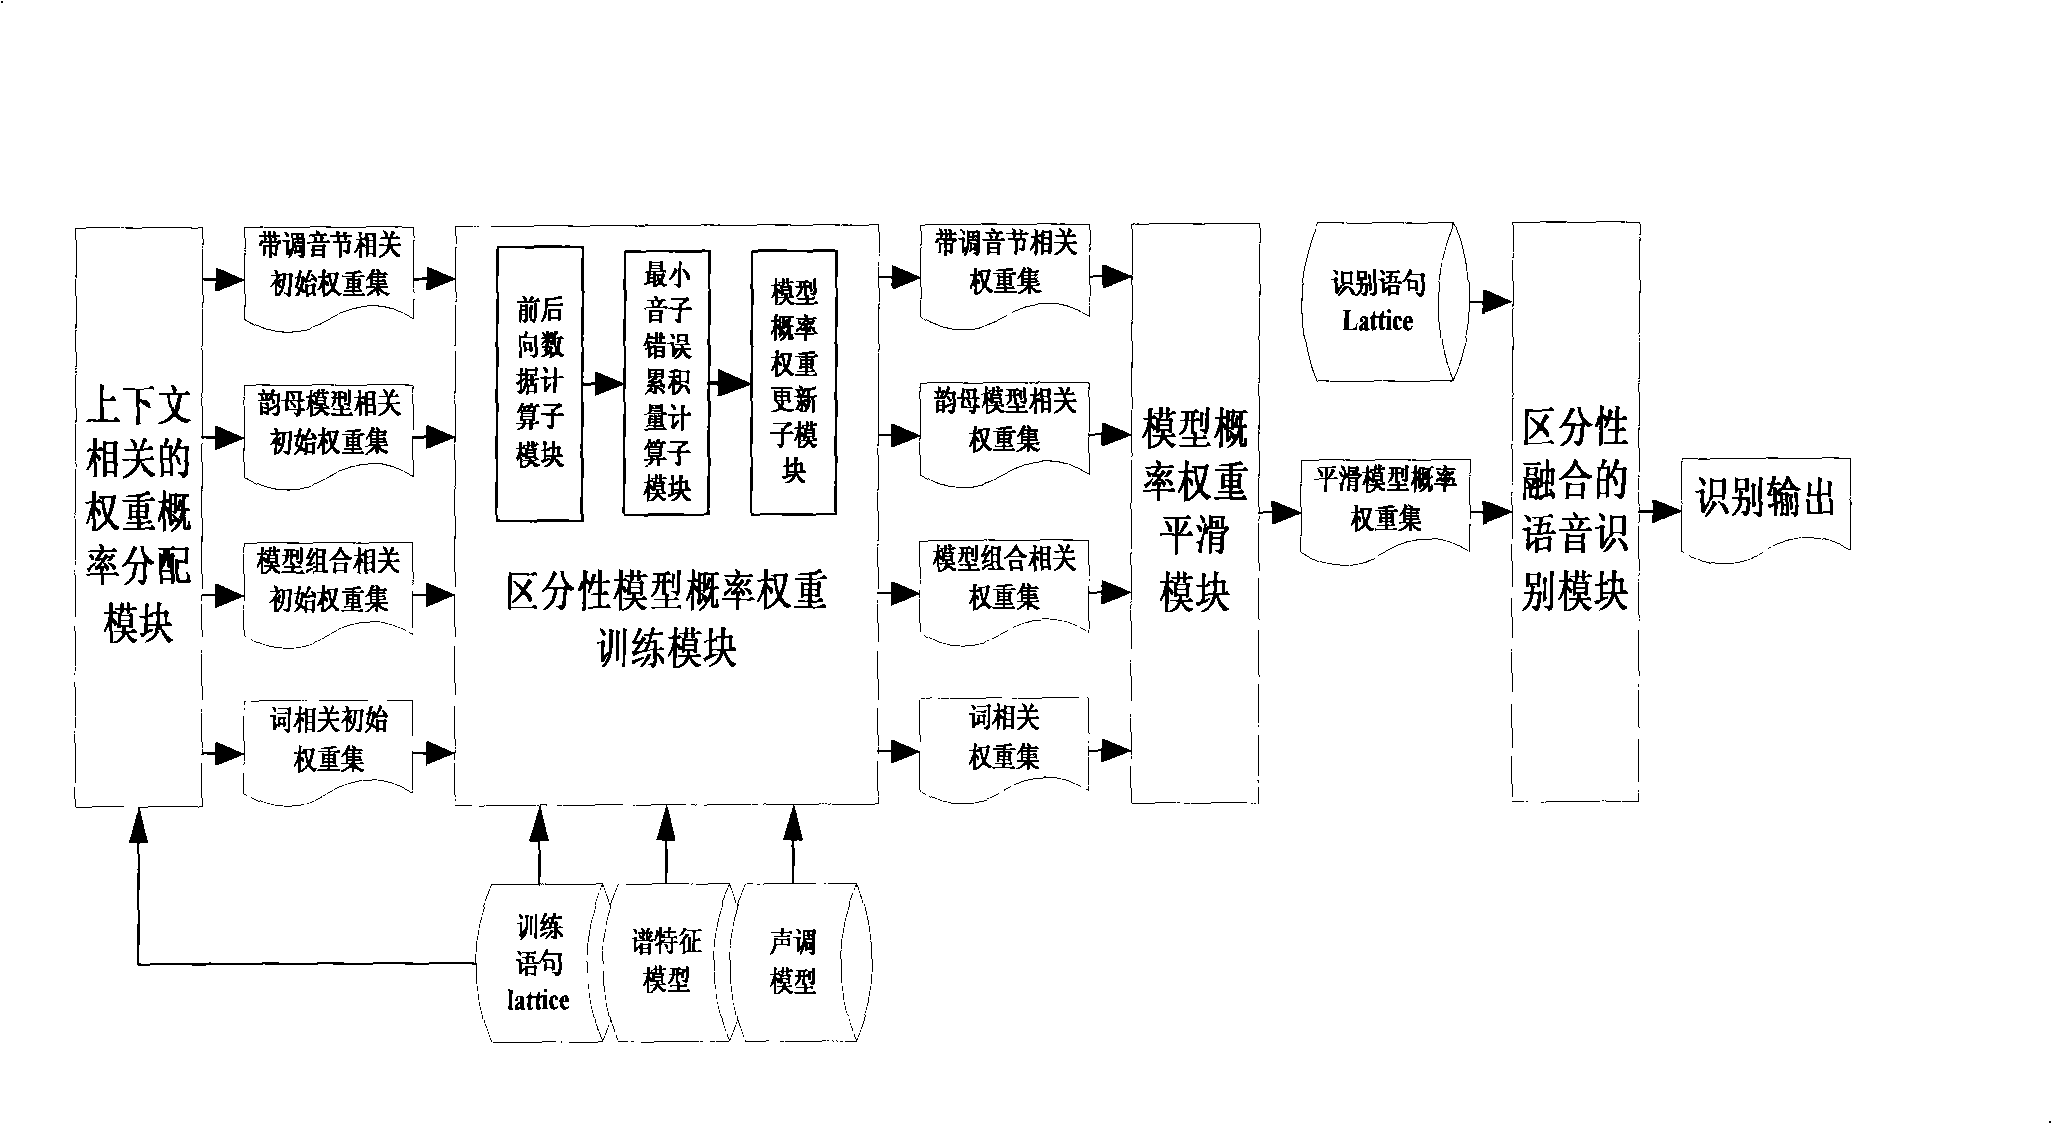 Chinese speech recognition system based on heterogeneous model differentiated fusion